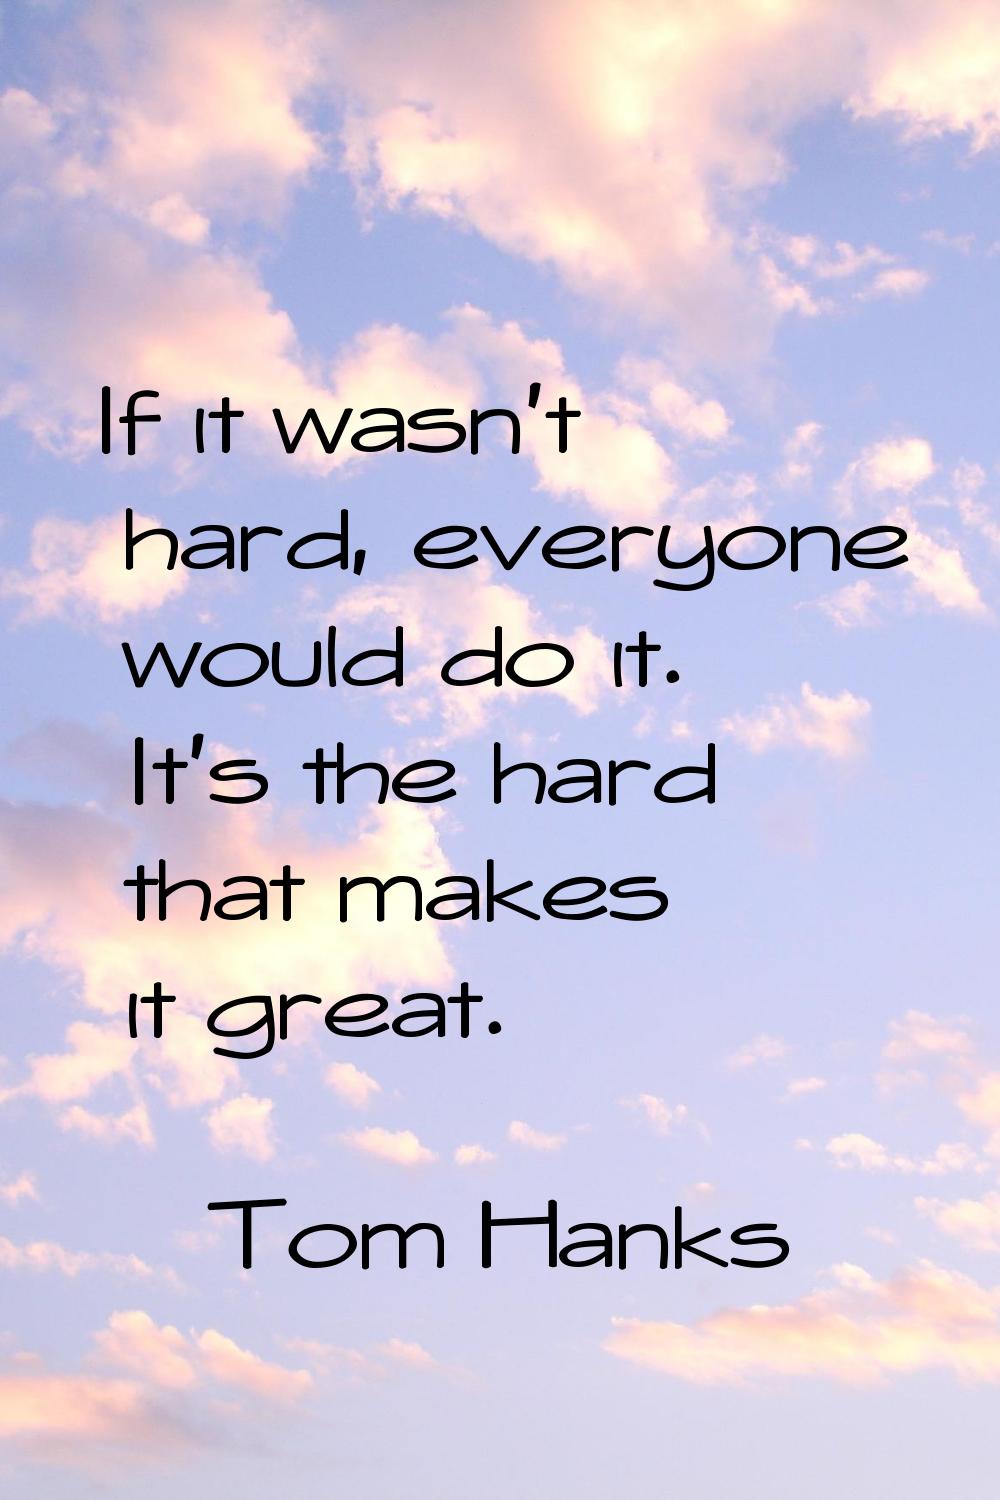 If it wasn't hard, everyone would do it. It's the hard that makes it great.